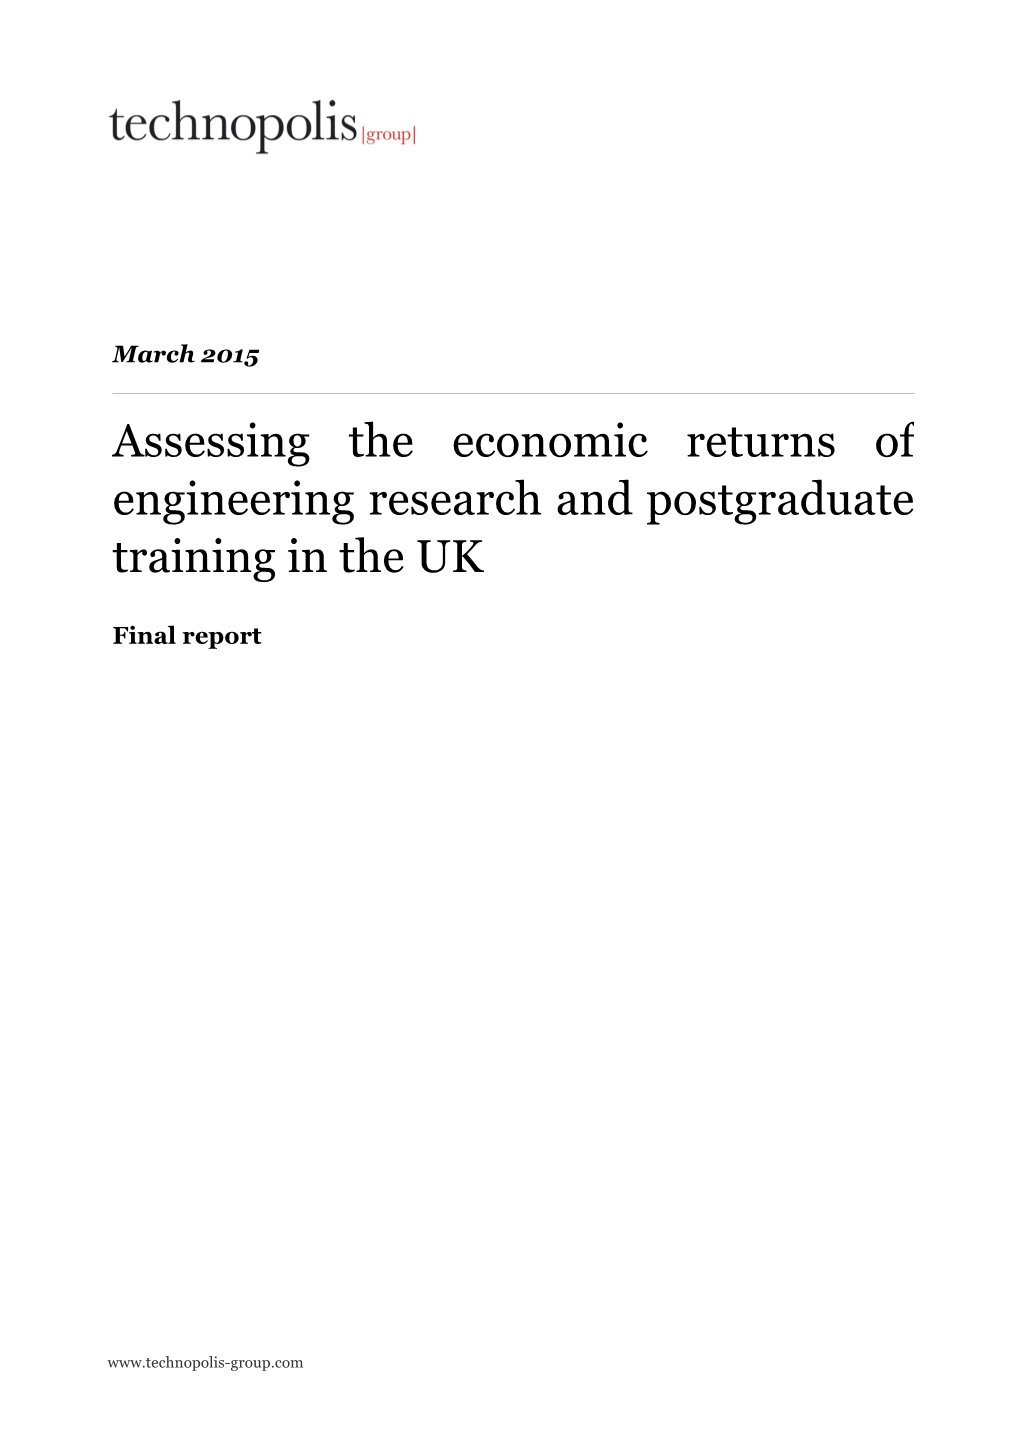 Assessing the Economic Returns of Engineering Research and Postgraduate Training in the UK